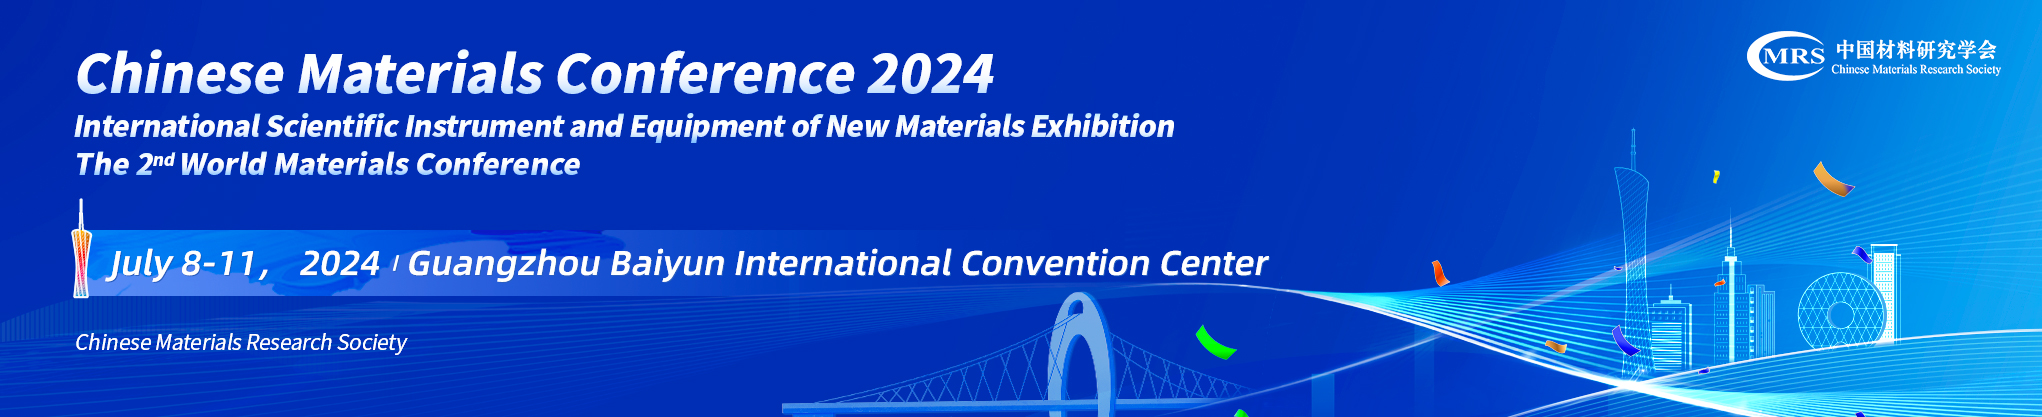 The World Materials Conference 2024 and Chinese Materials Conference 2024